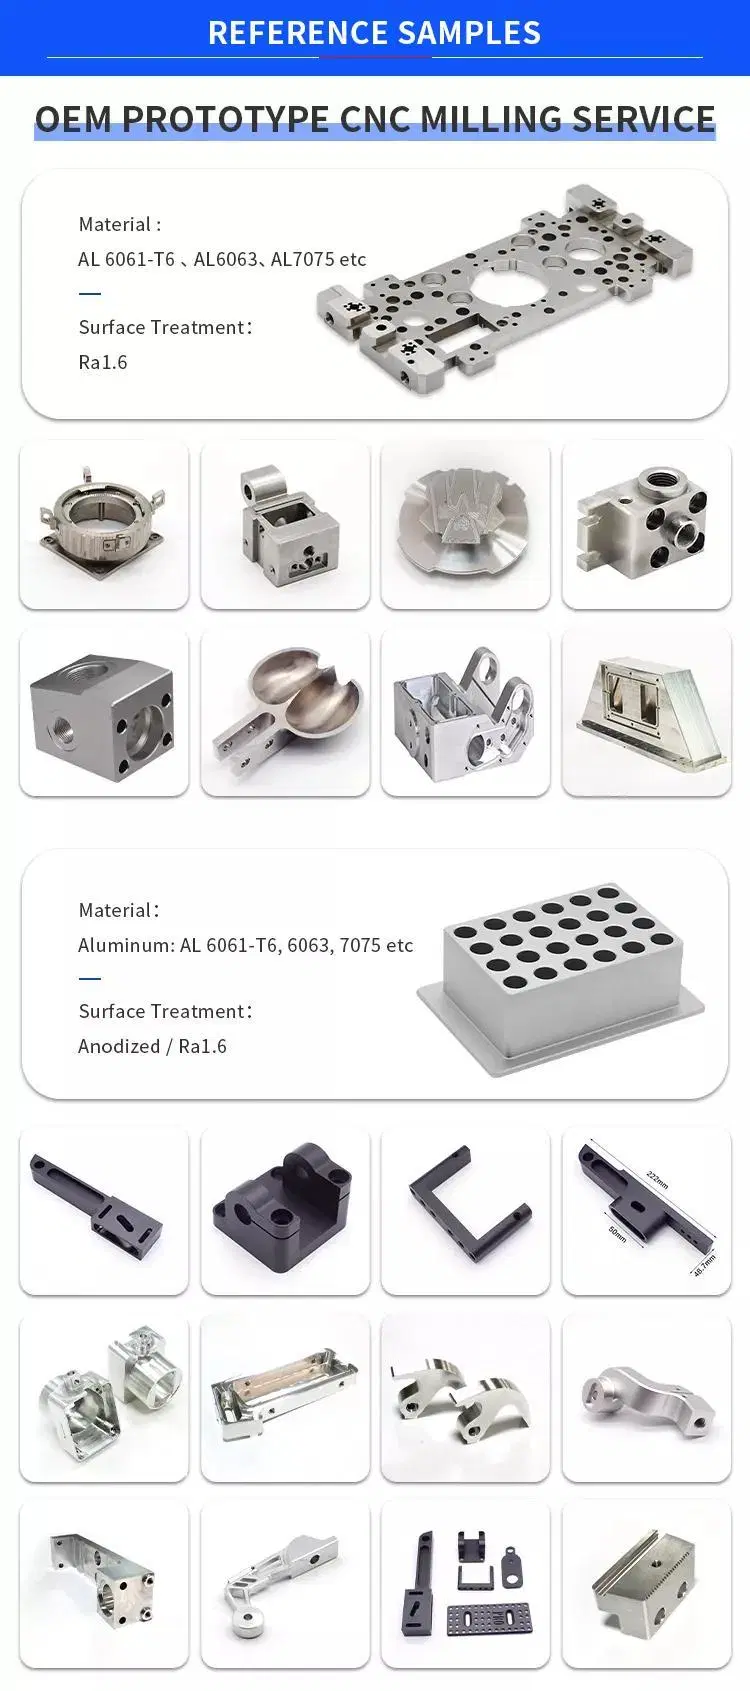 Custom Stainless Steel Fabrication Service Mechanical Parts Rapid Prototyping CNC